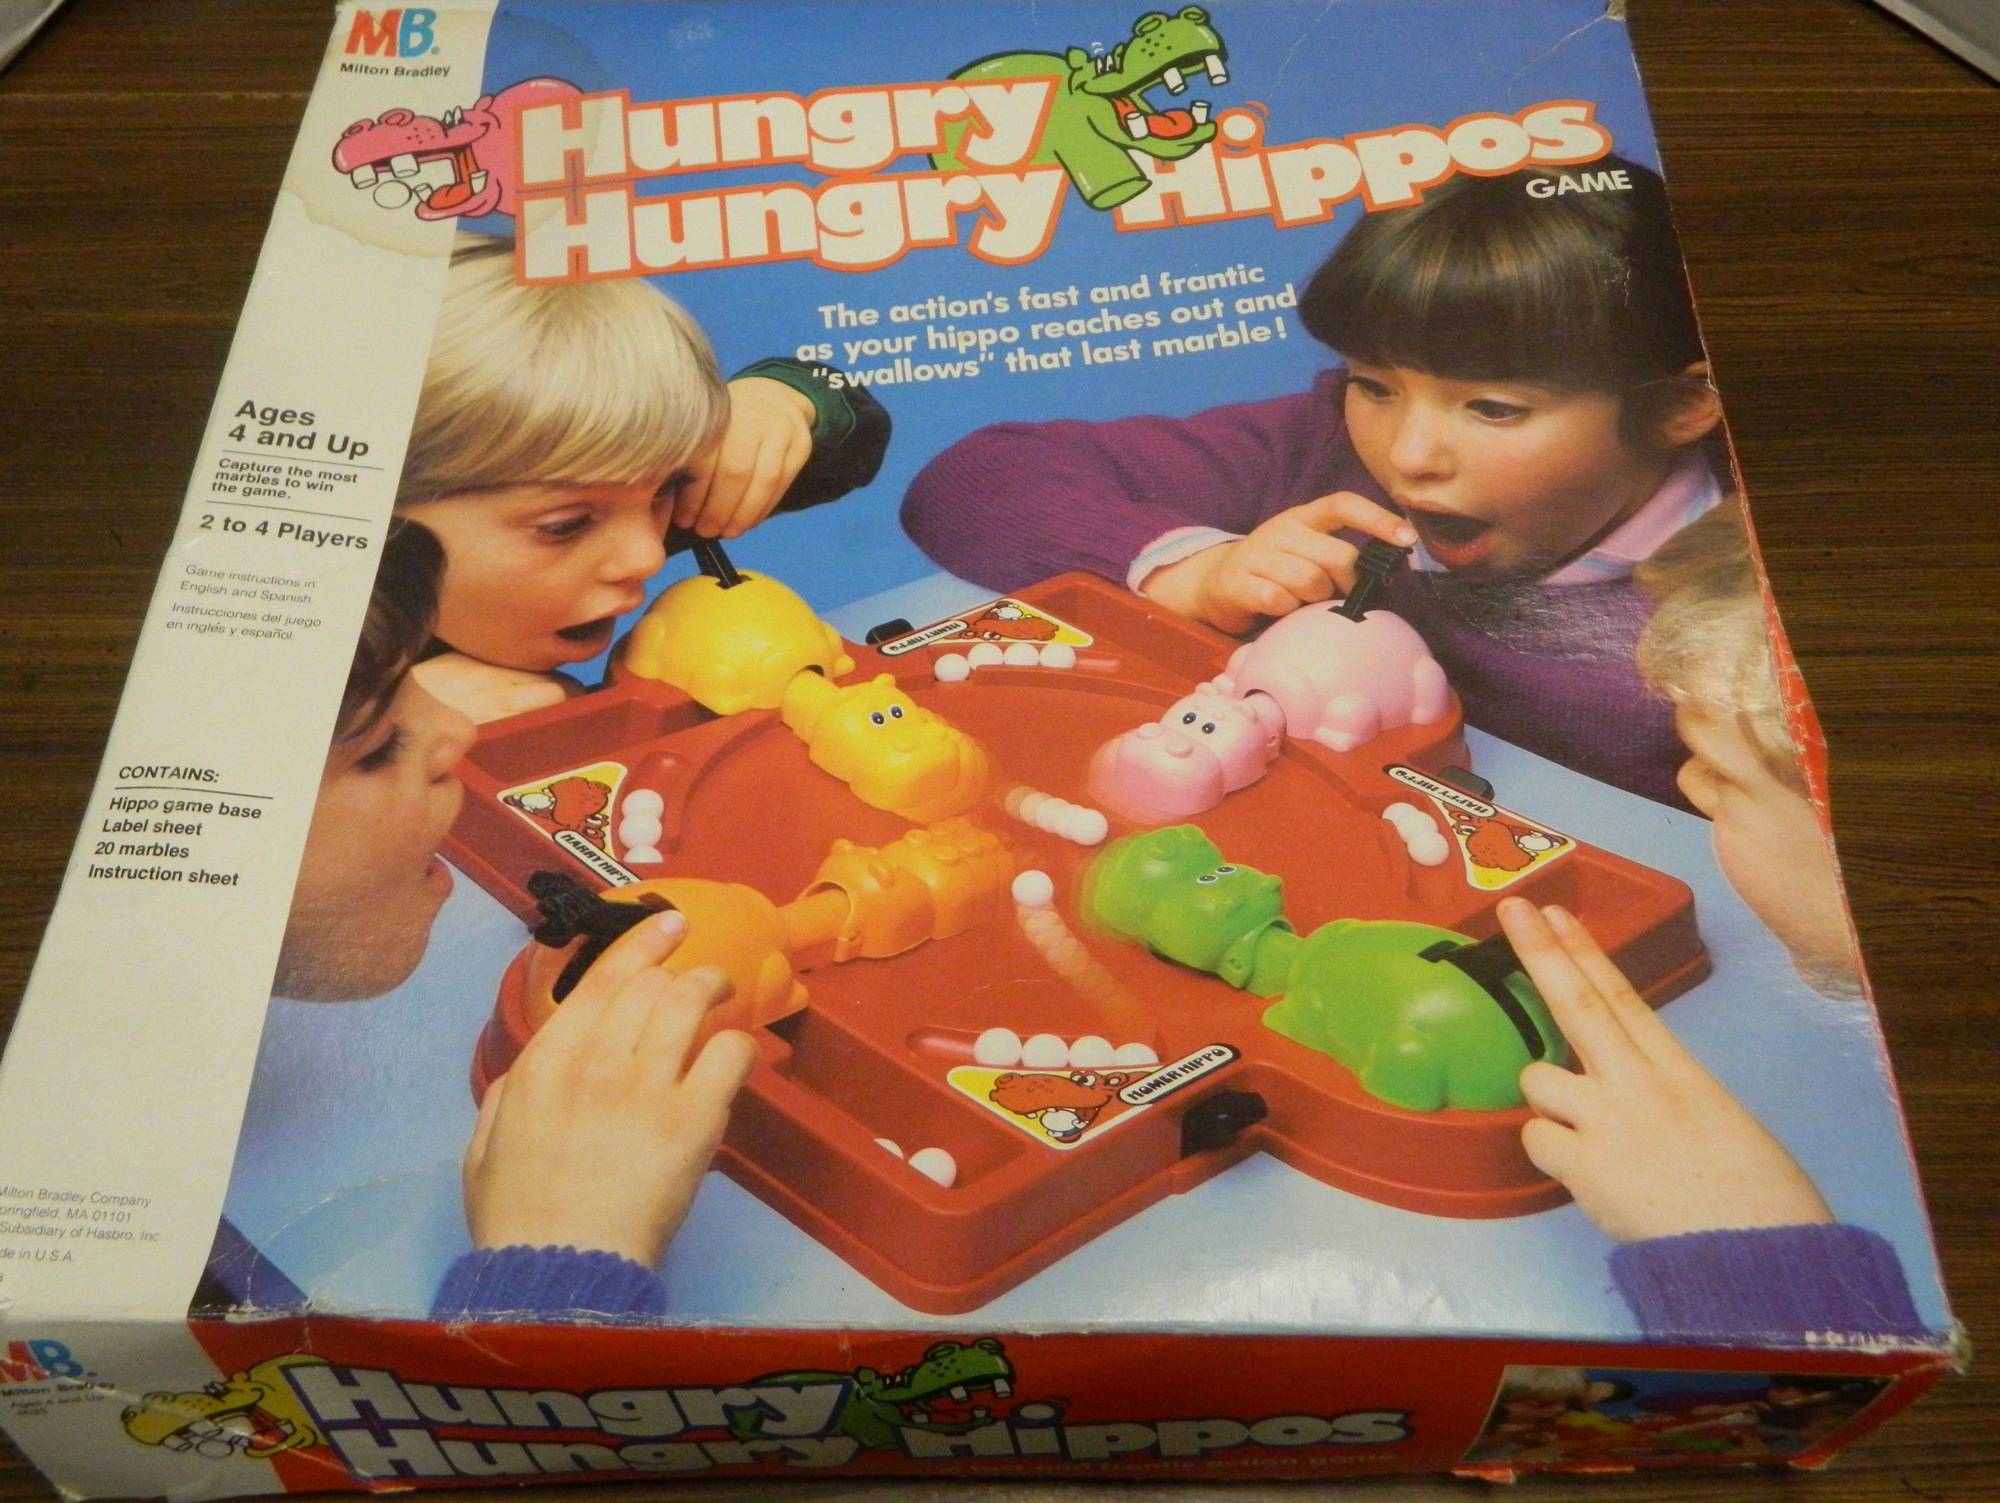 Box for Hungry Hungry Hippos